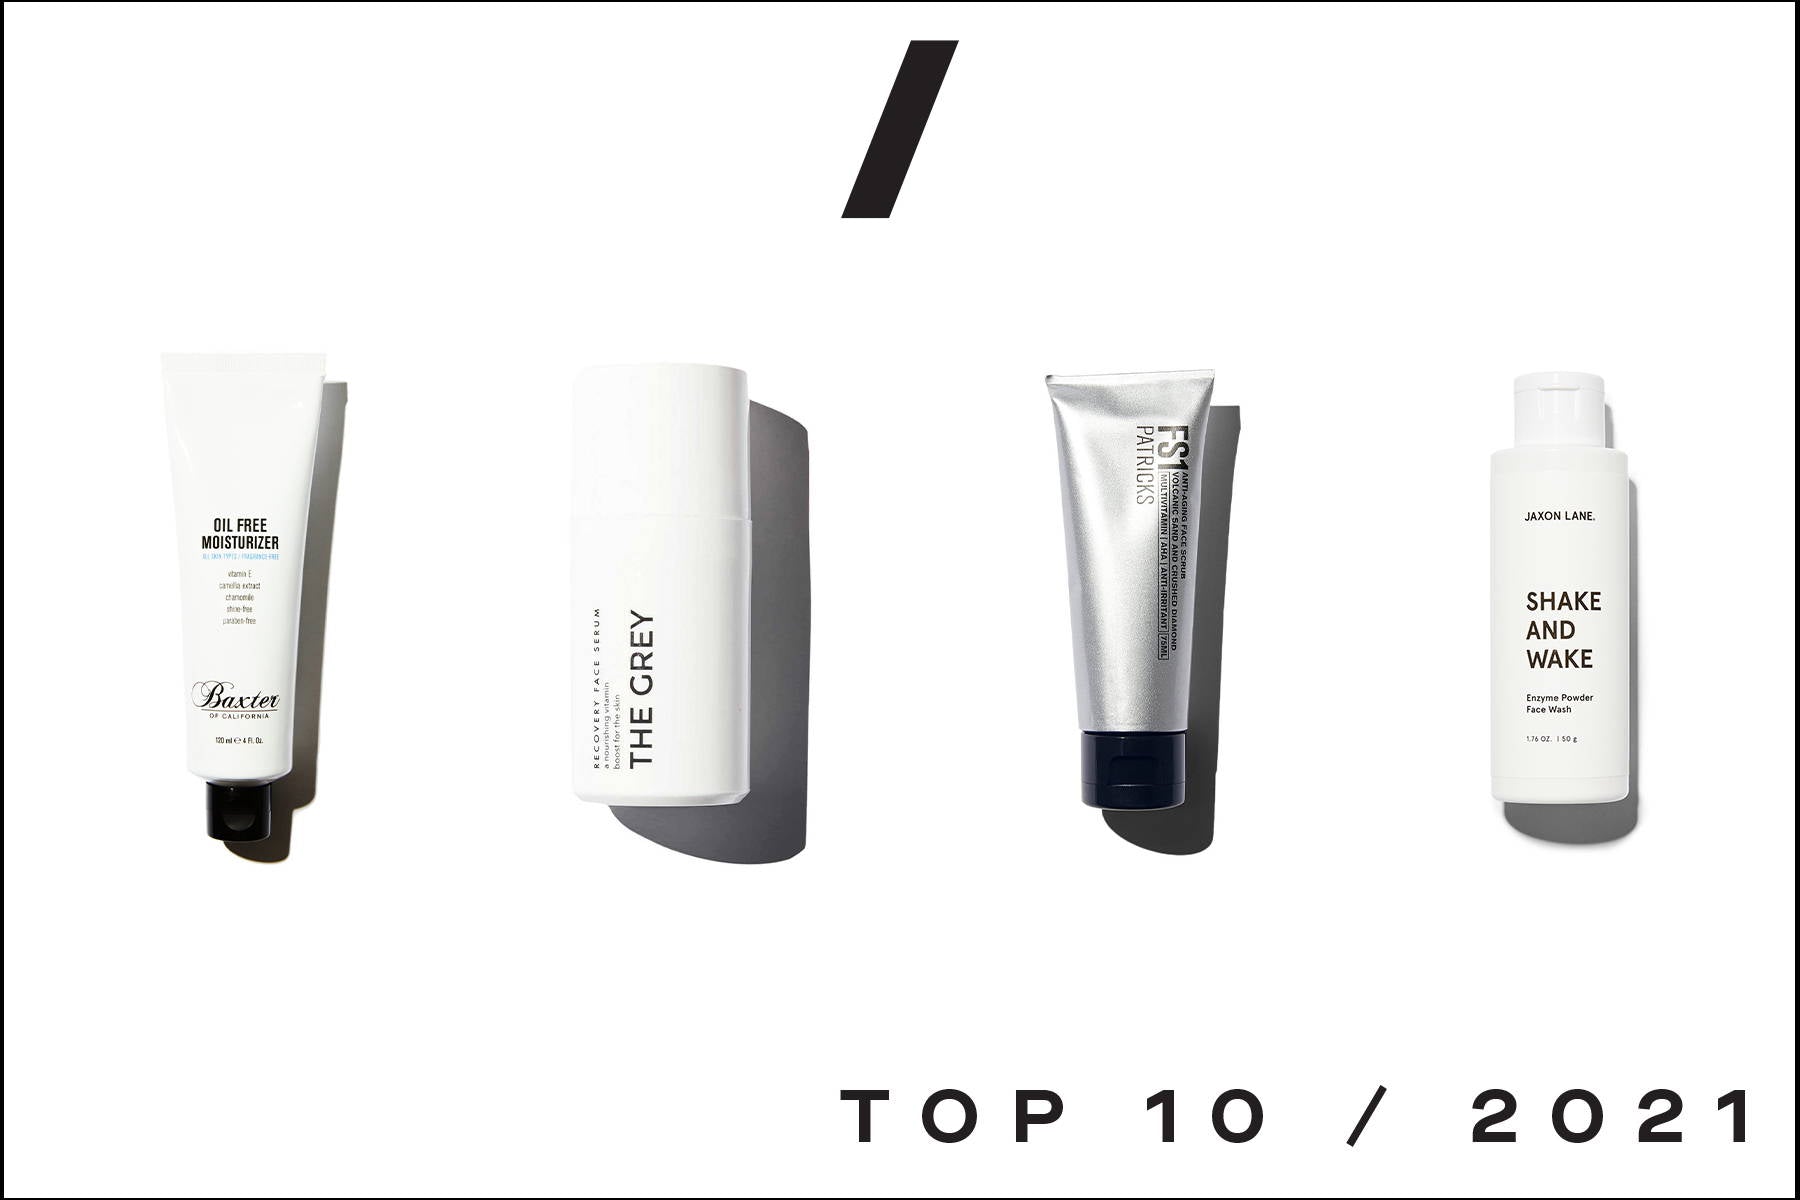 Top 10 Men's Grooming Products of 2021